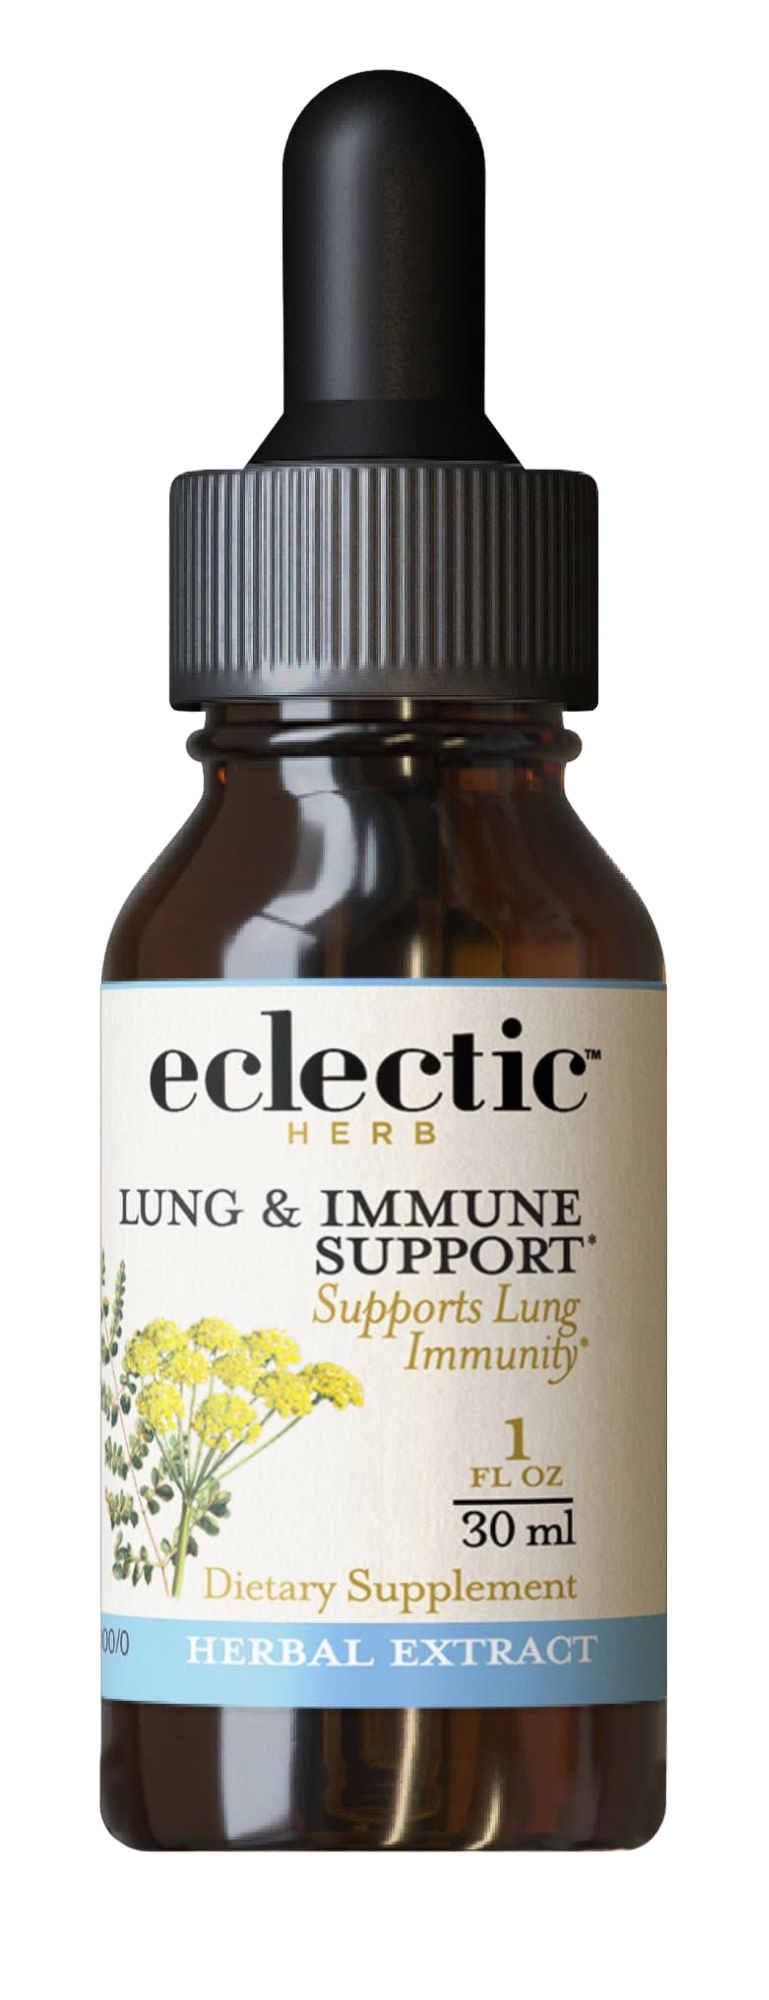 Lung and Immune Support